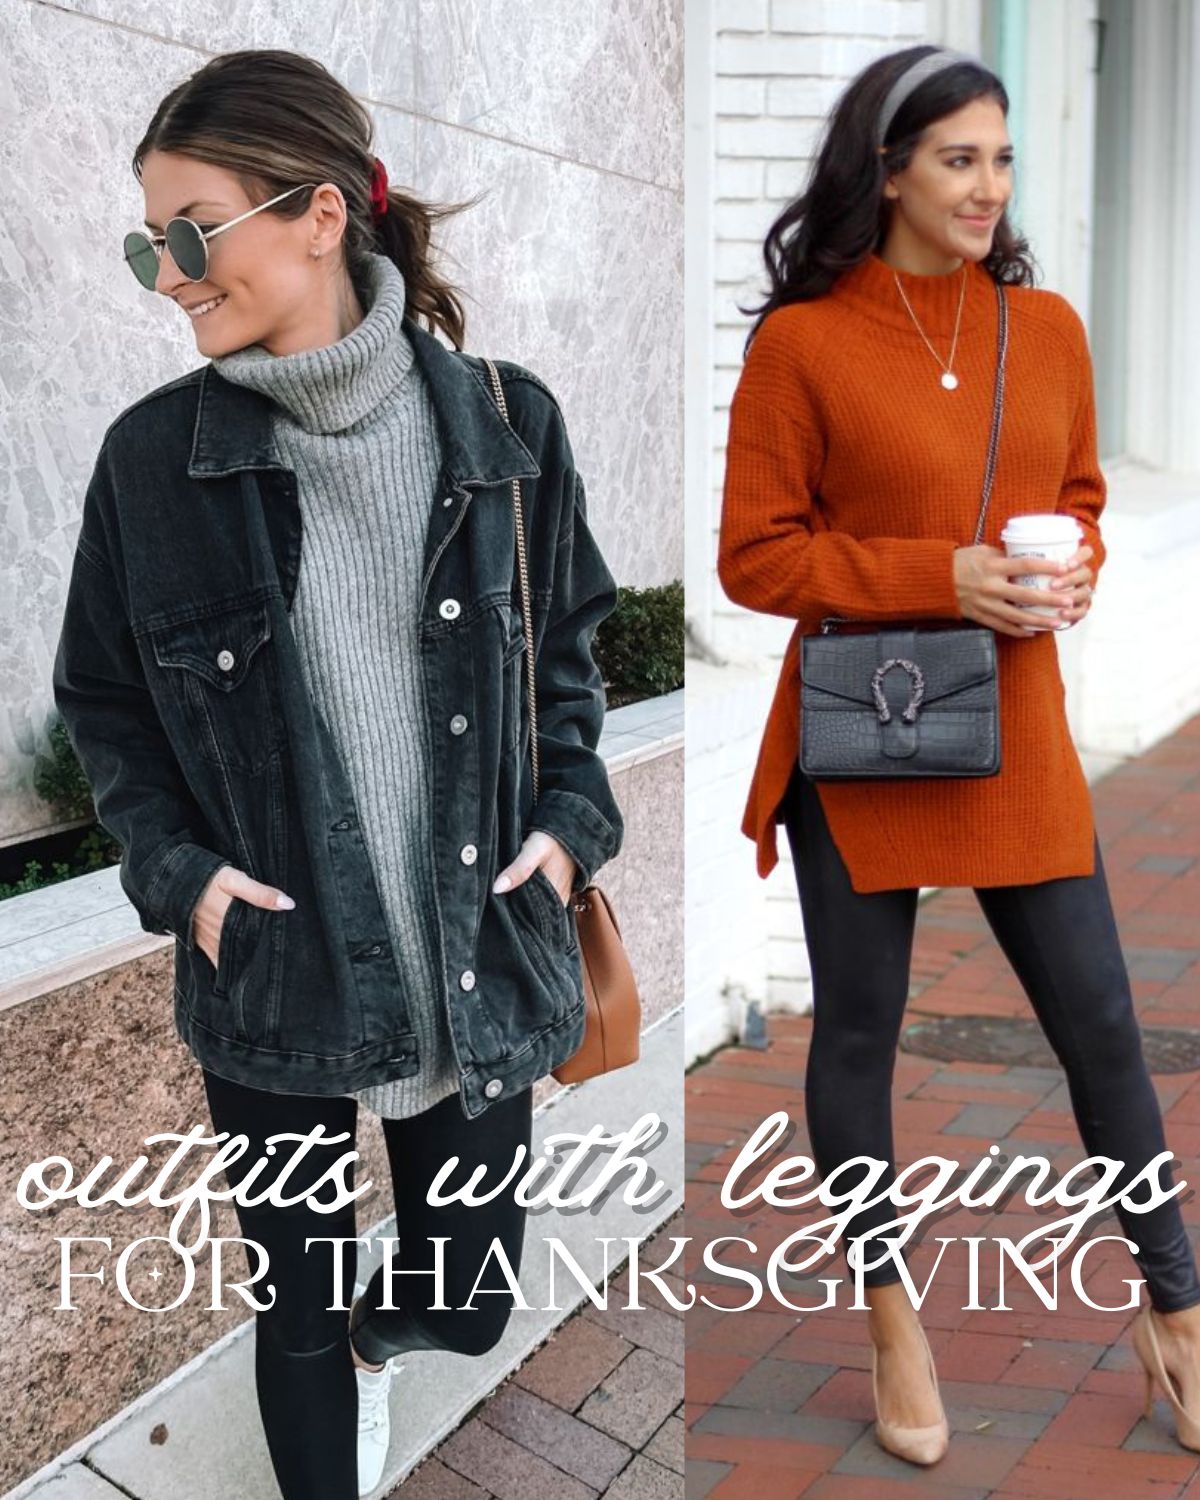 Sweater and leggings outfits for thanksgiving